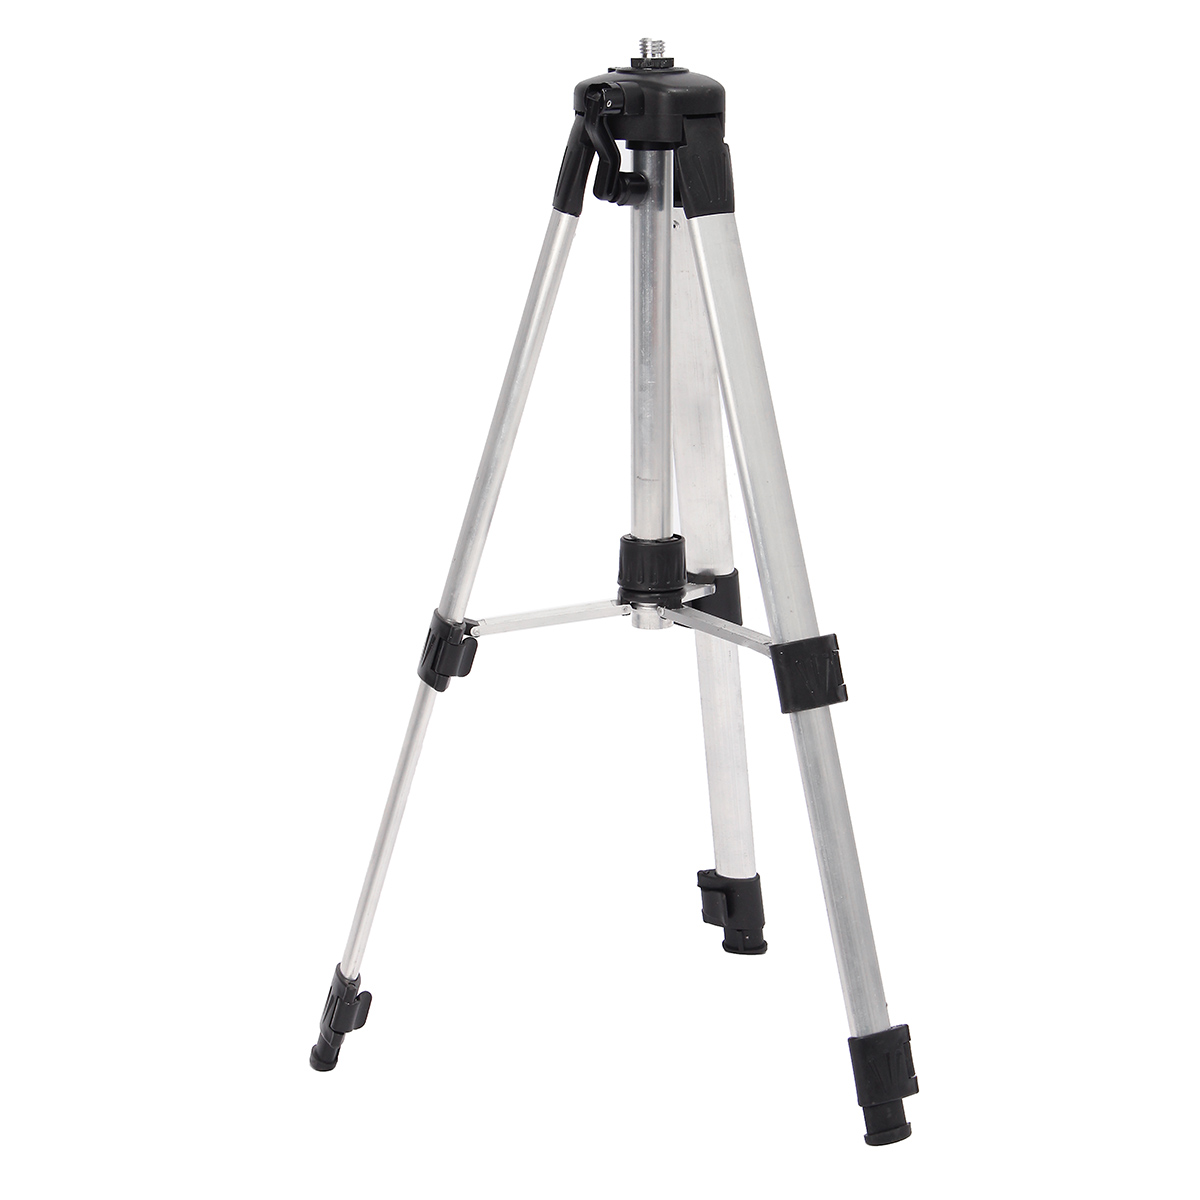 15M-Tripod-Automatic-Self-360-Degree-Leveling-Measure-Building-Level-Construction-Marker-Tools-1268077